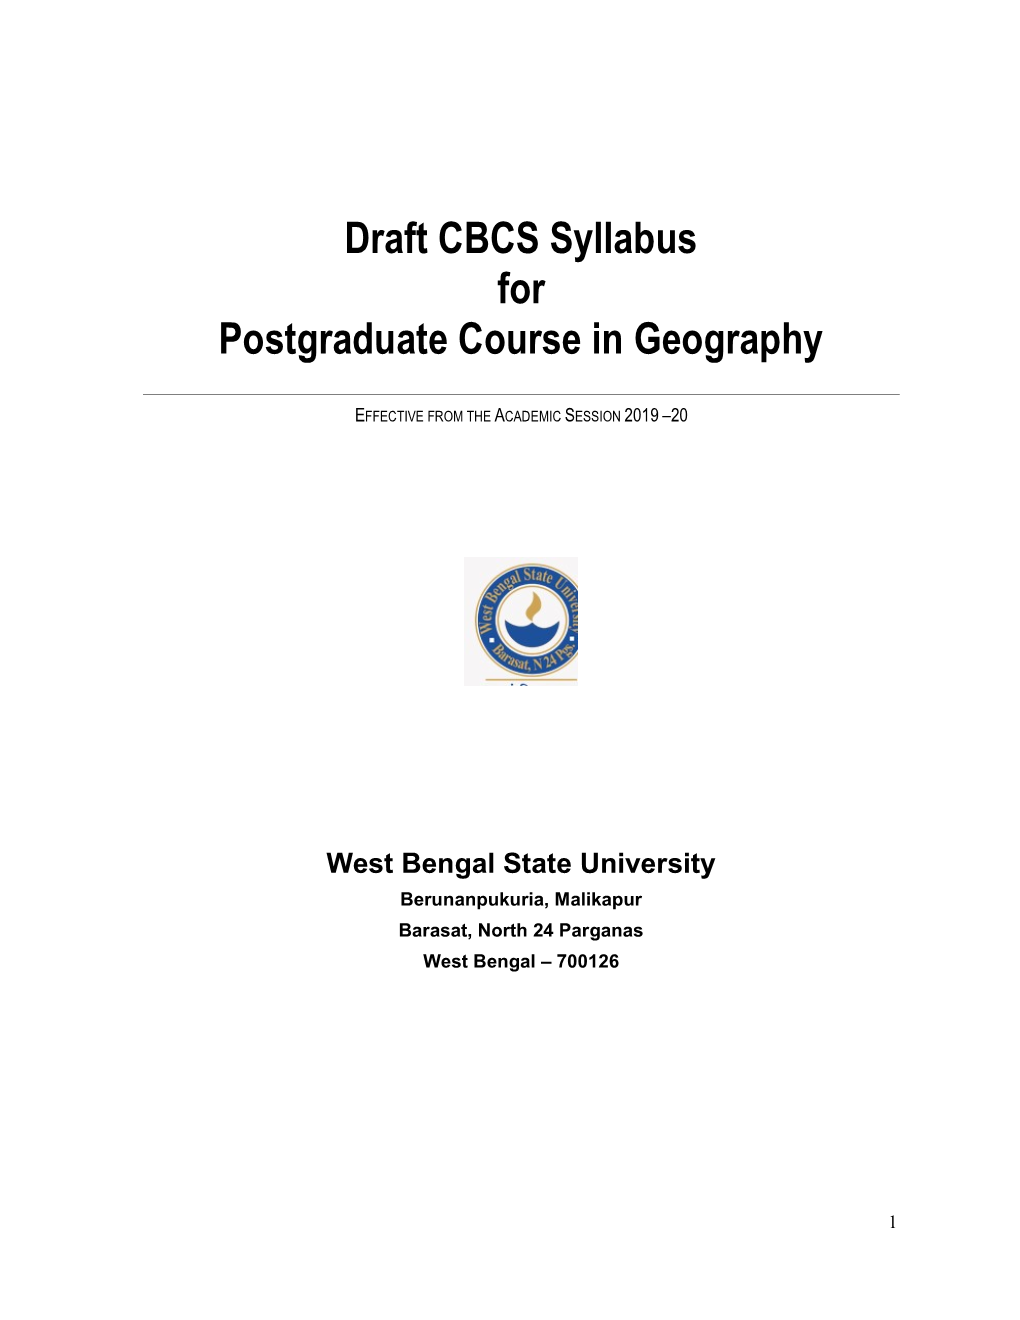 Draft CBCS Syllabus for Postgraduate Course in Geography